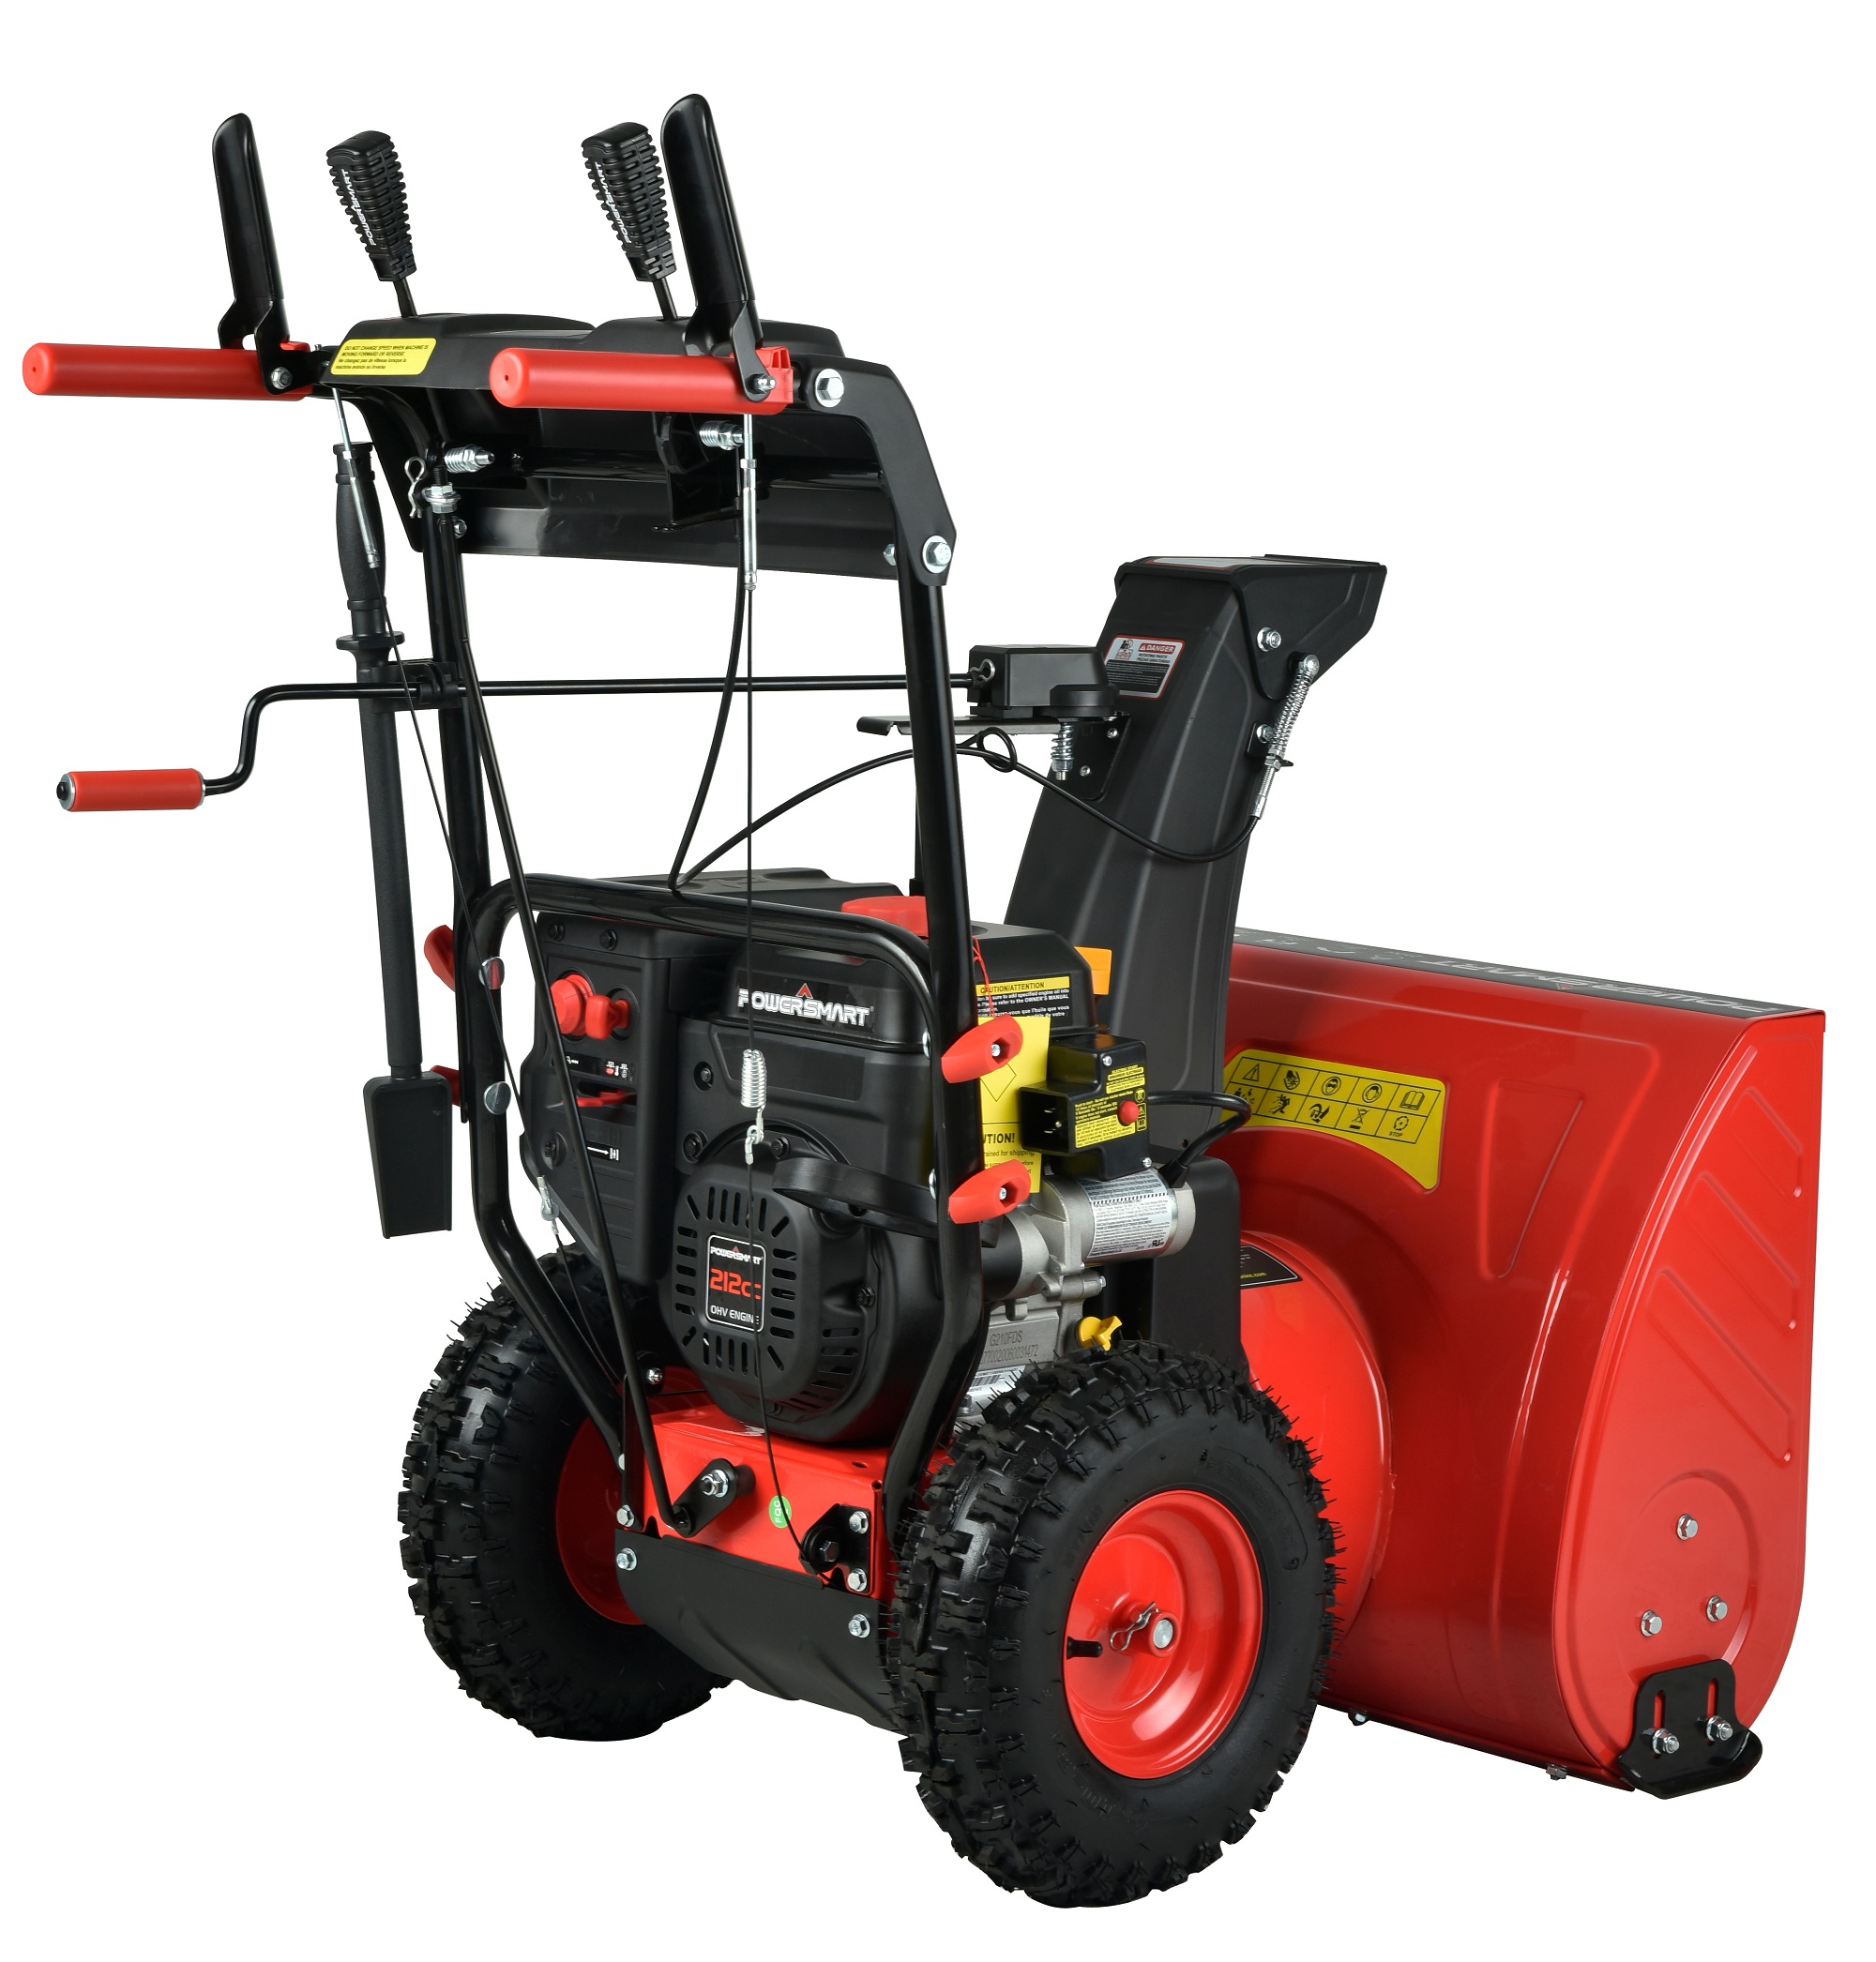 PowerSmart PSSW24 24 in. 212cc 2-Stage Electric Start Gas Snow Blower - image 4 of 8